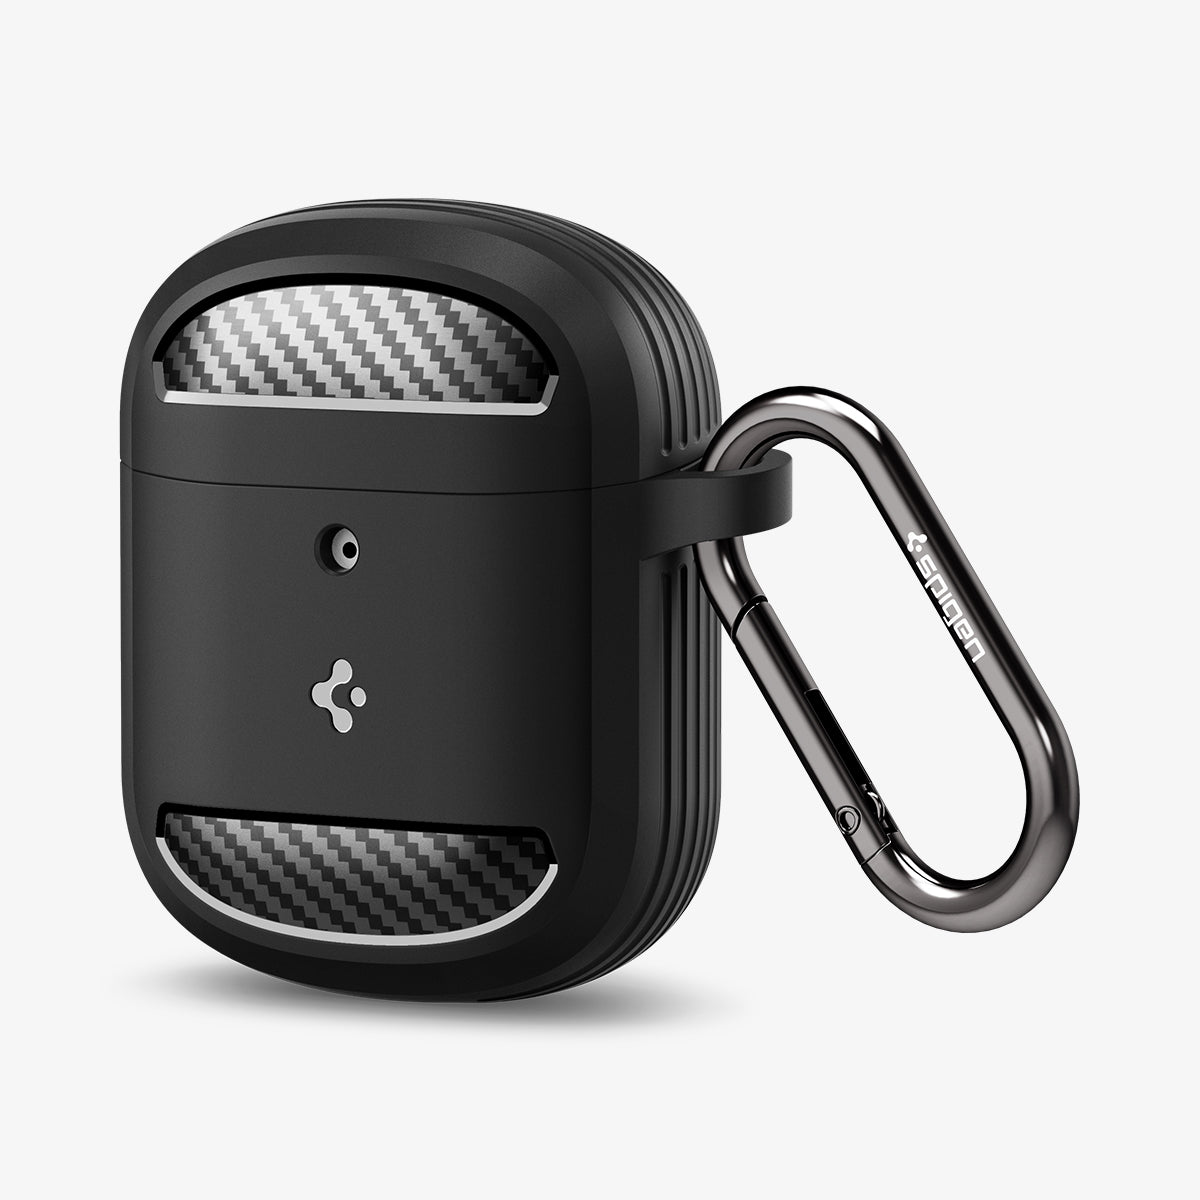 ACS05133 - Pixel Buds Pro Case Rugged Armor in matte black showing the front, partial side and carabiner